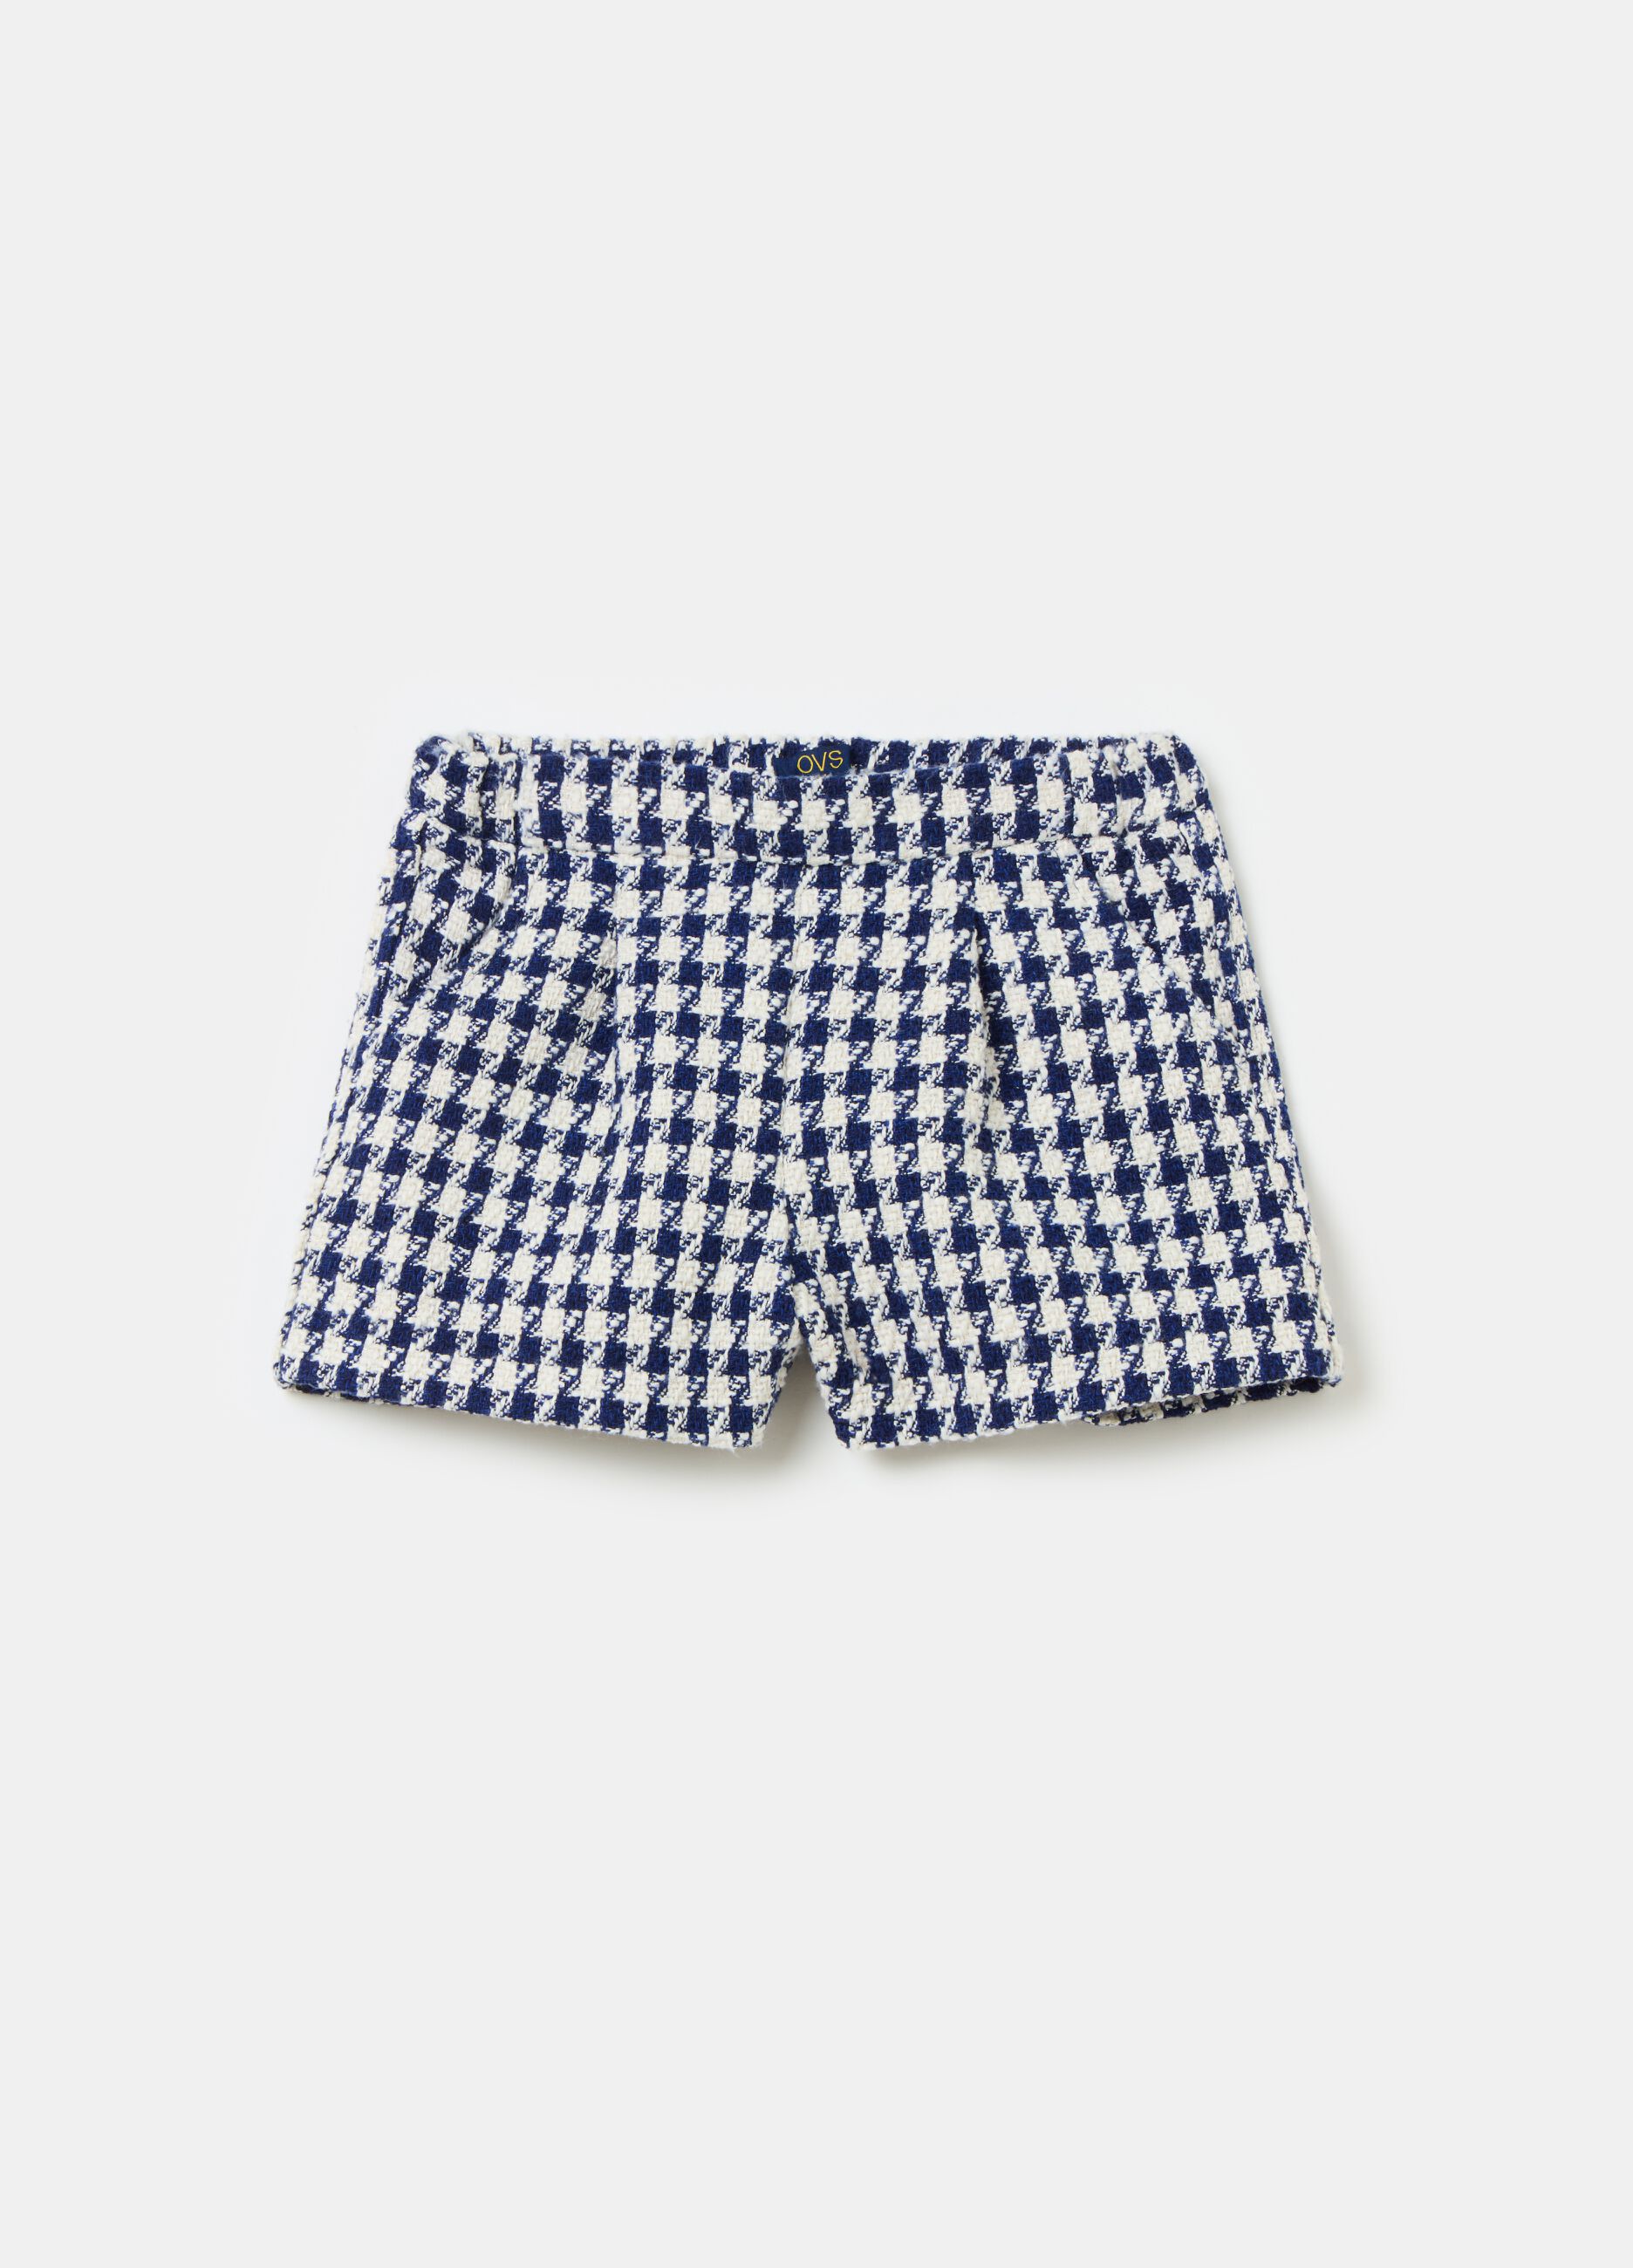 Houndstooth shorts in tweed